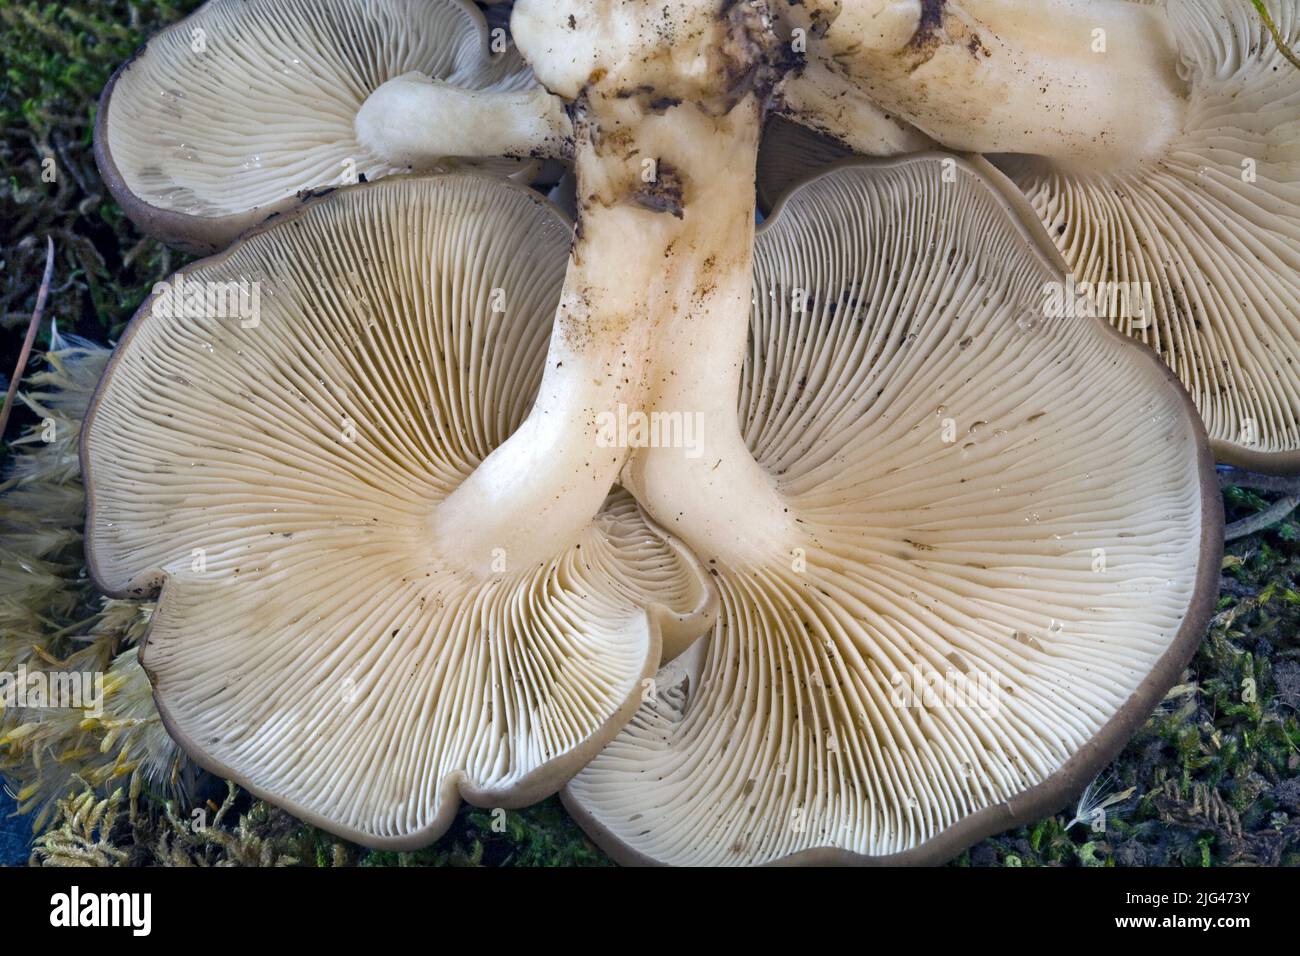 Lyophyllum decastes mushrooms, commonly known as Fried Chicken Mushrooms, growing on a roadside in the central Oregon Cascades near Camp Sherman, Oregon. Stock Photo